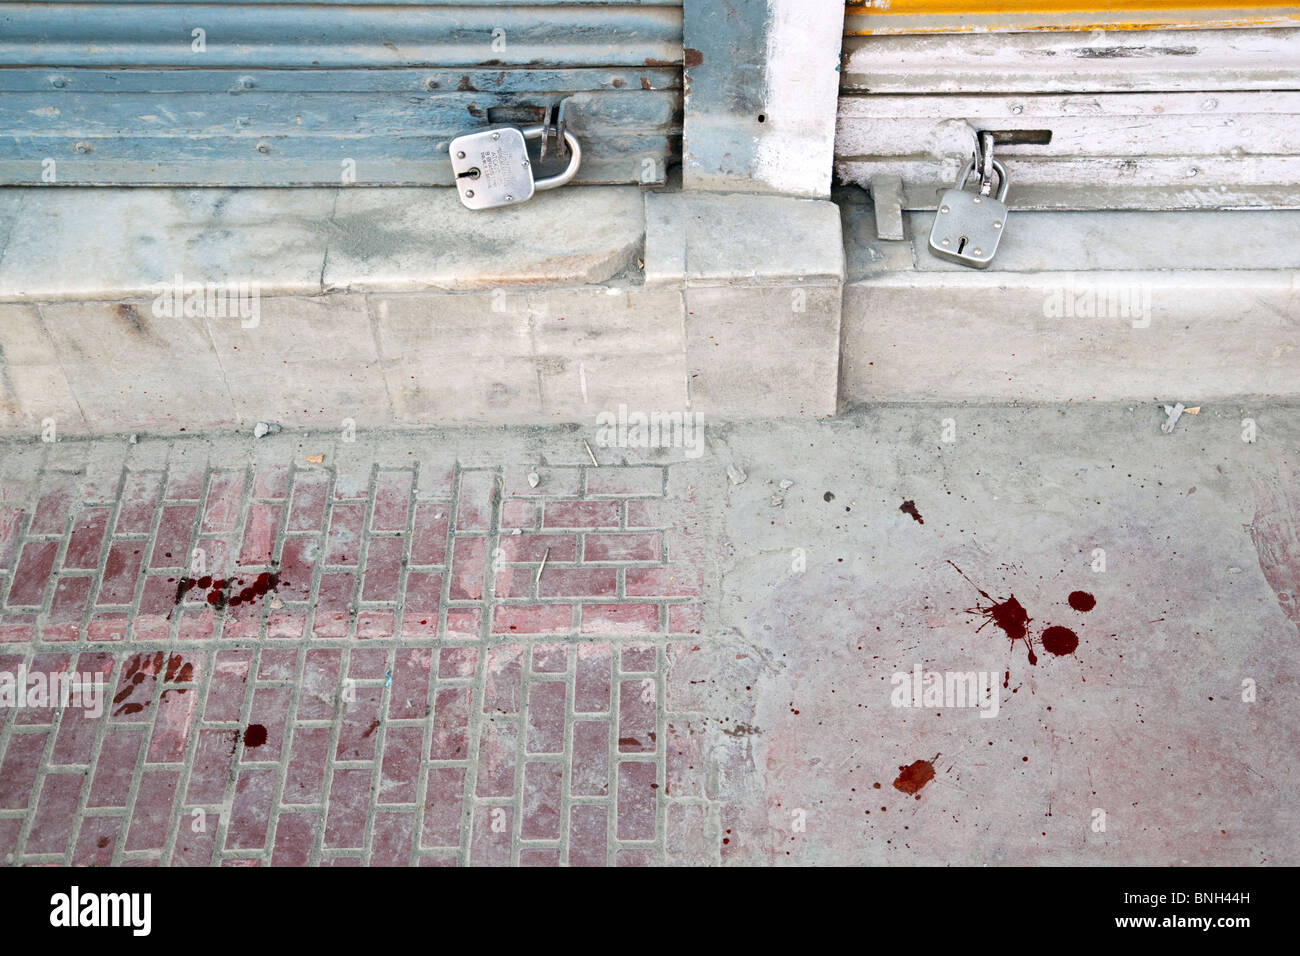 A blood on the pavement while riots in Srinagar, Jammu and Kashmir, India. Stock Photo